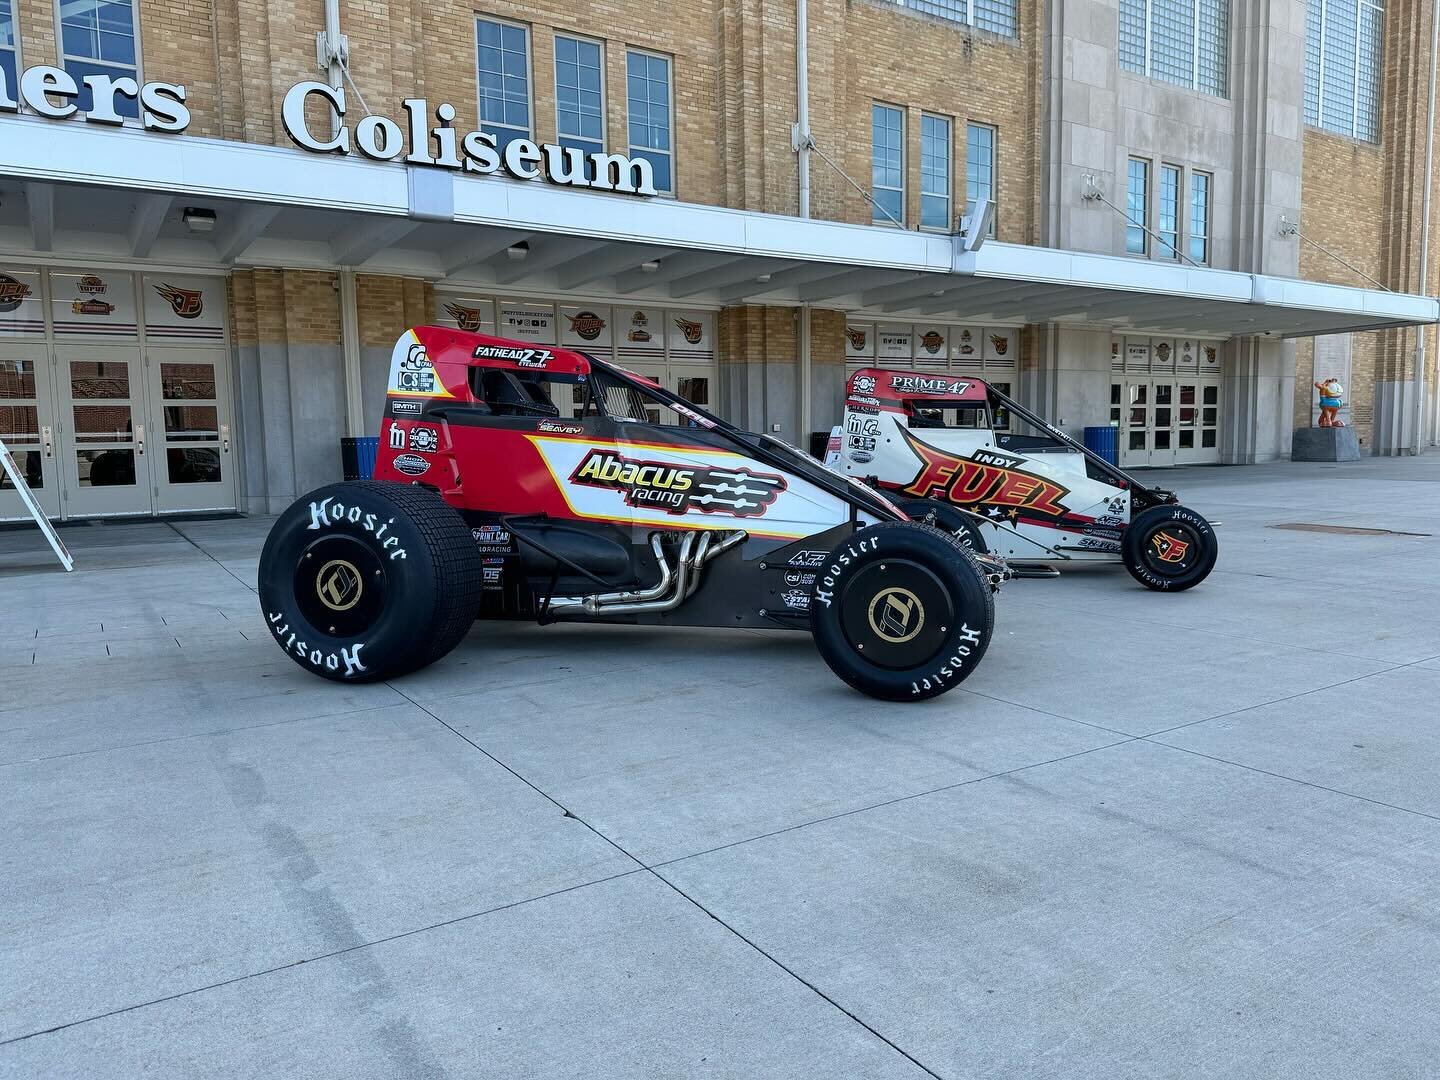 Check out the Abacus Racing #57 midget and sprint car tonight during USAC Night with the @indyfuel! Our cars will be parked out by the entrance to get into the game. The 57 midget is sporting a new Indy Fuel wrap!